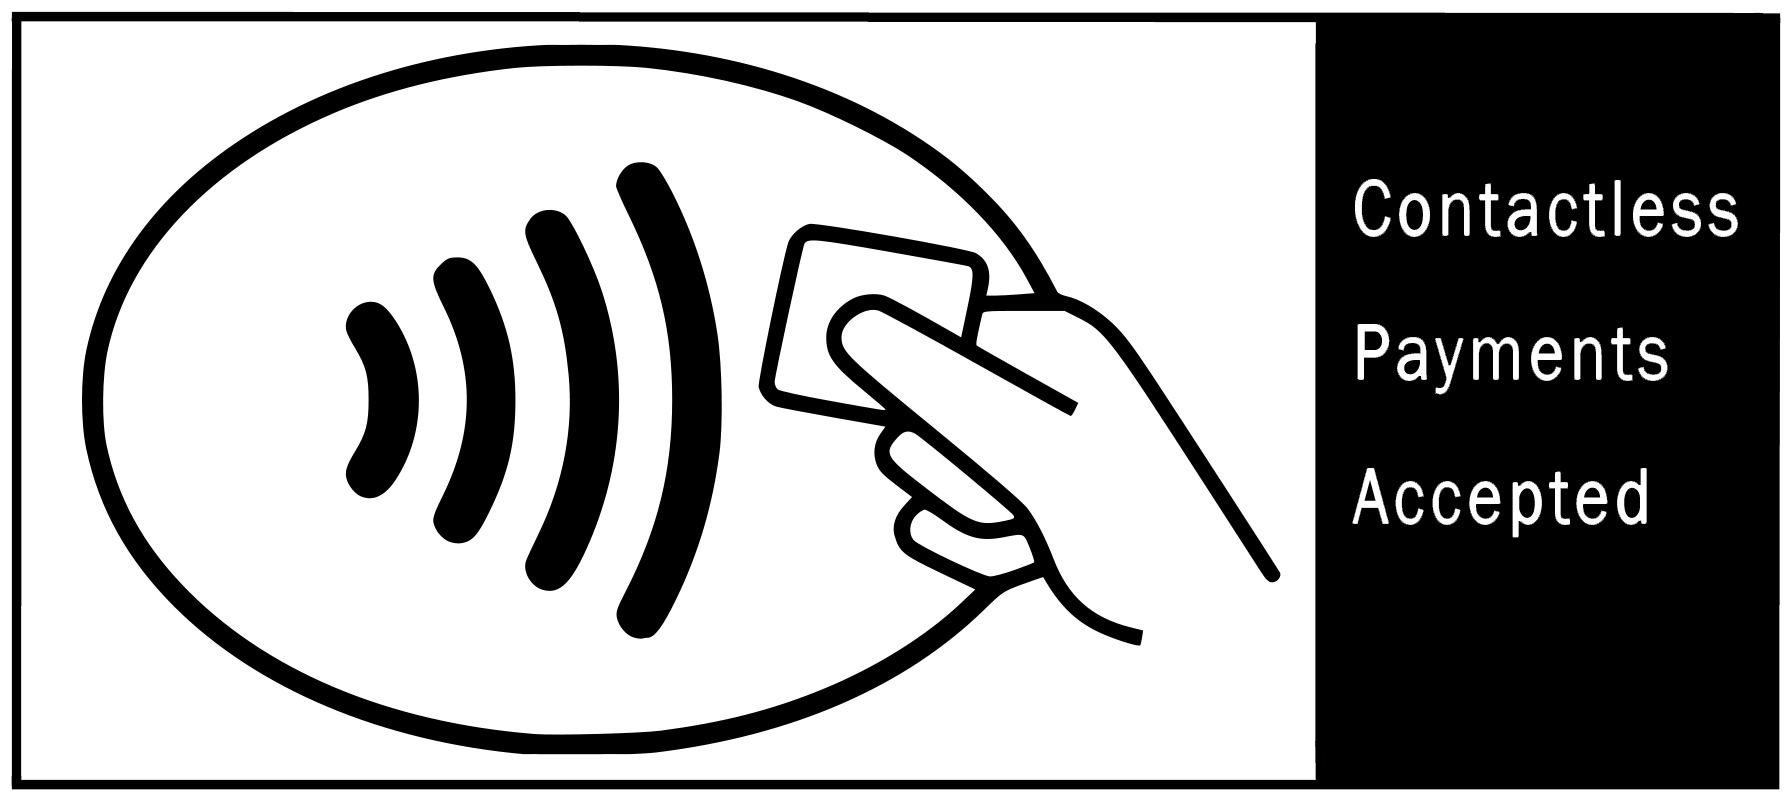 Contactless Payment Accepted Sticker